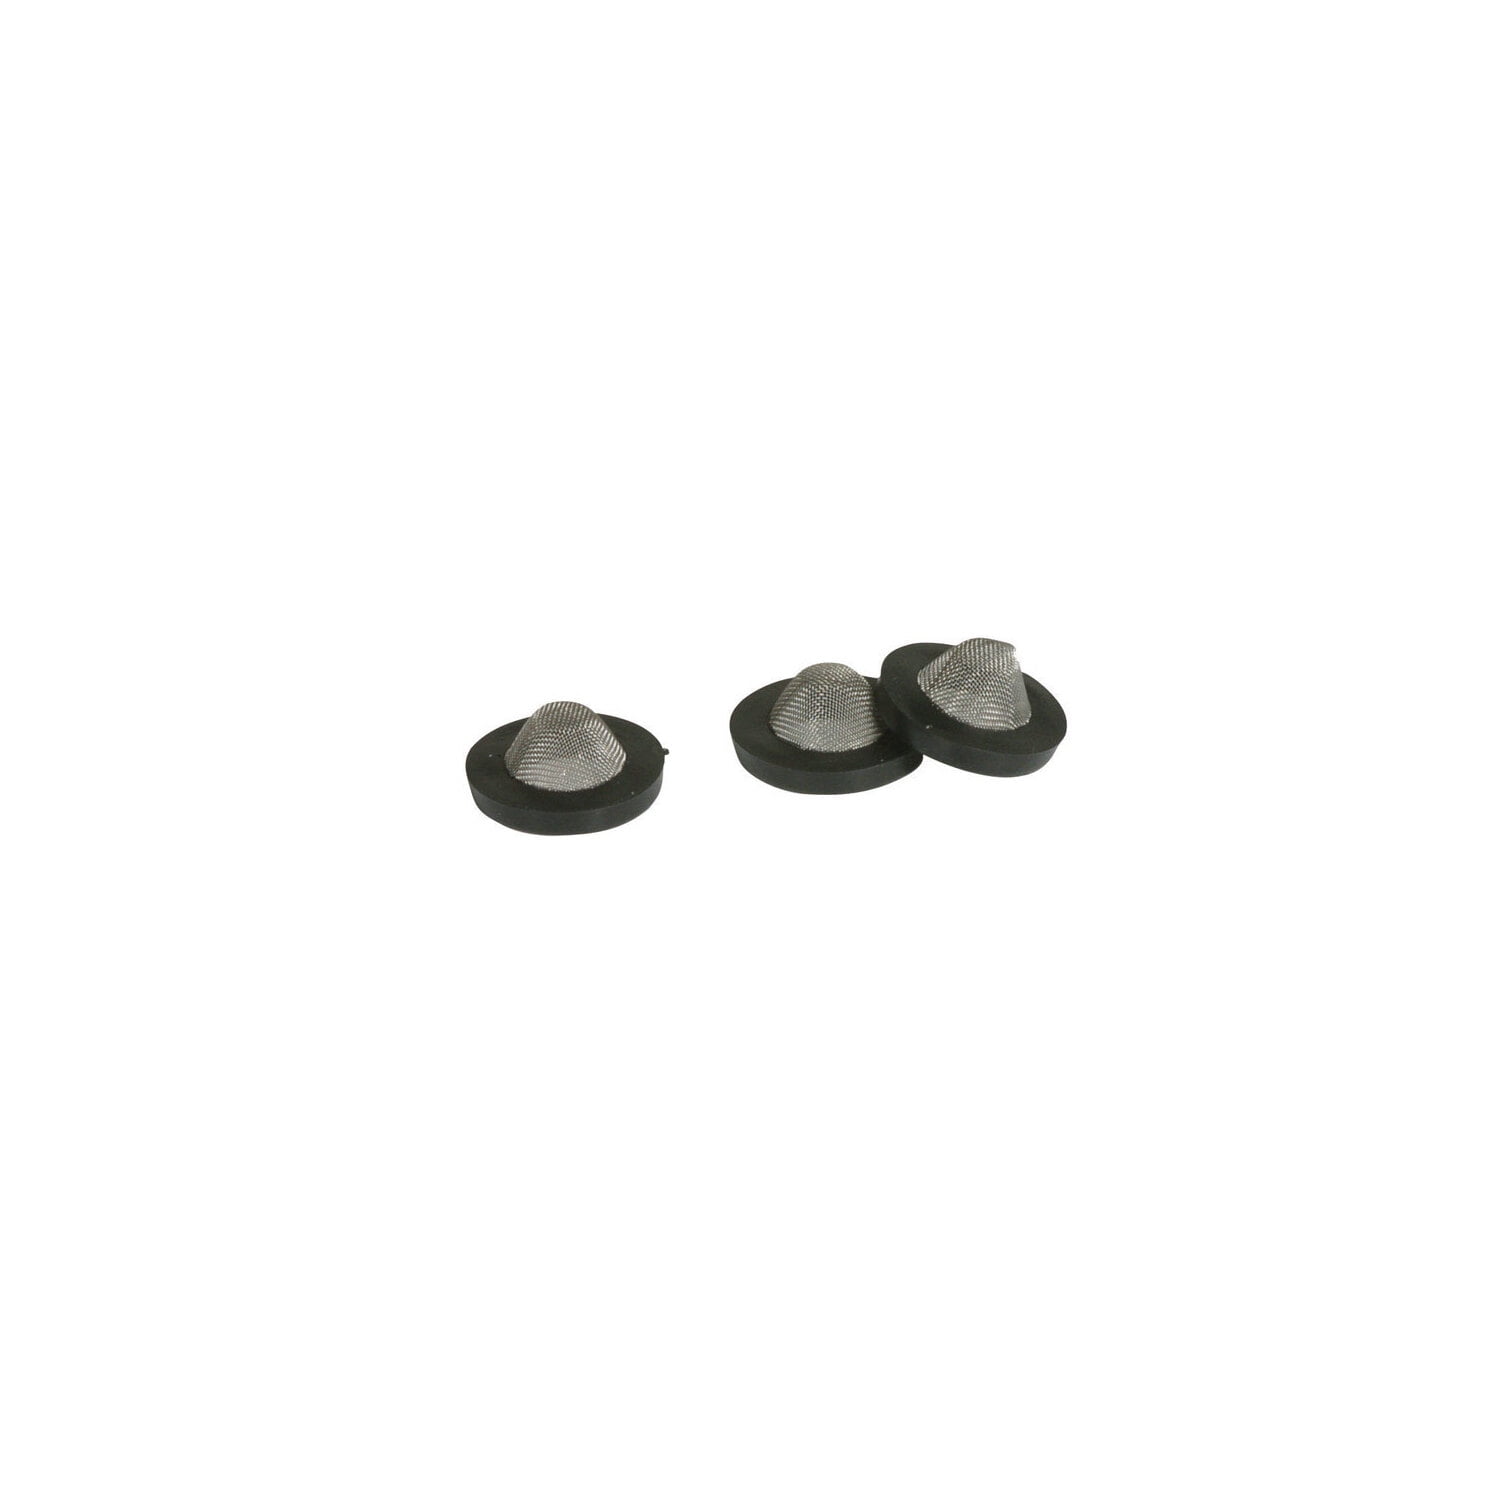 Pack of 3 Camco 20183 1" Hose Filter Washer 